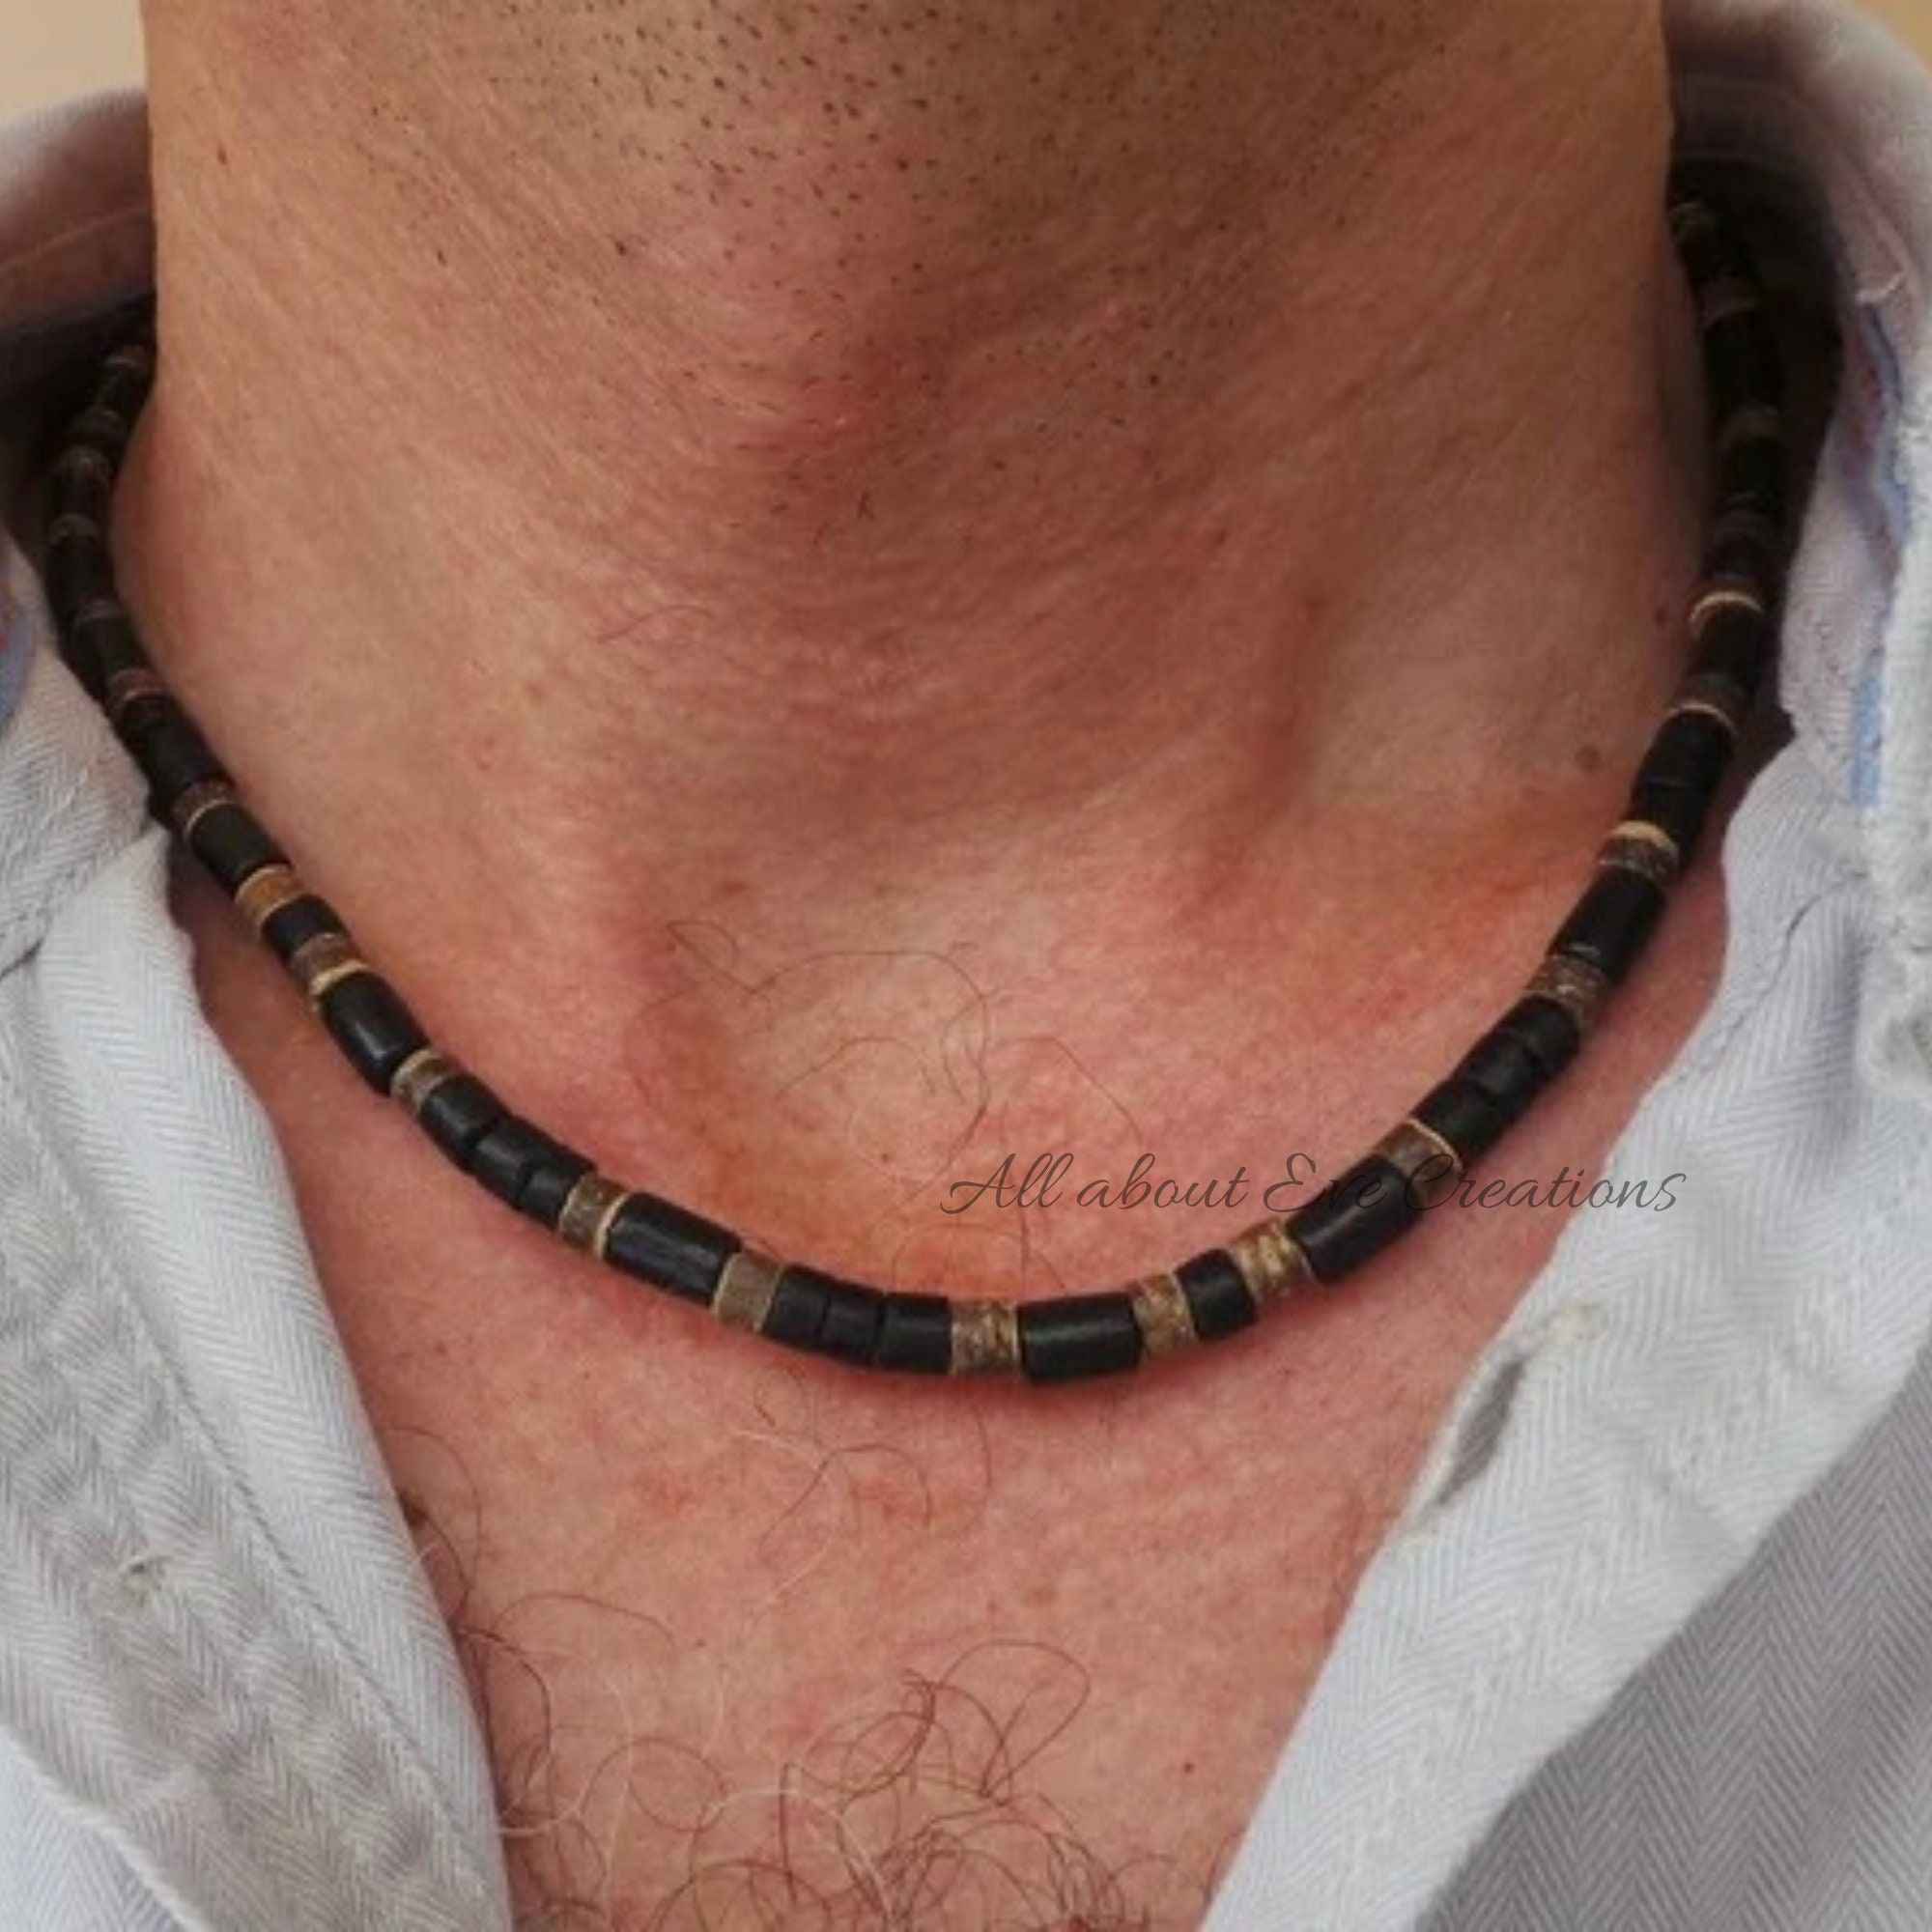 Natural Stone Coconut Shell Boha Choker Necklace For Men Fashionable Beach  Boho Jewelry For Surfing And Chiling From Brittanyard, $10.12 | DHgate.Com